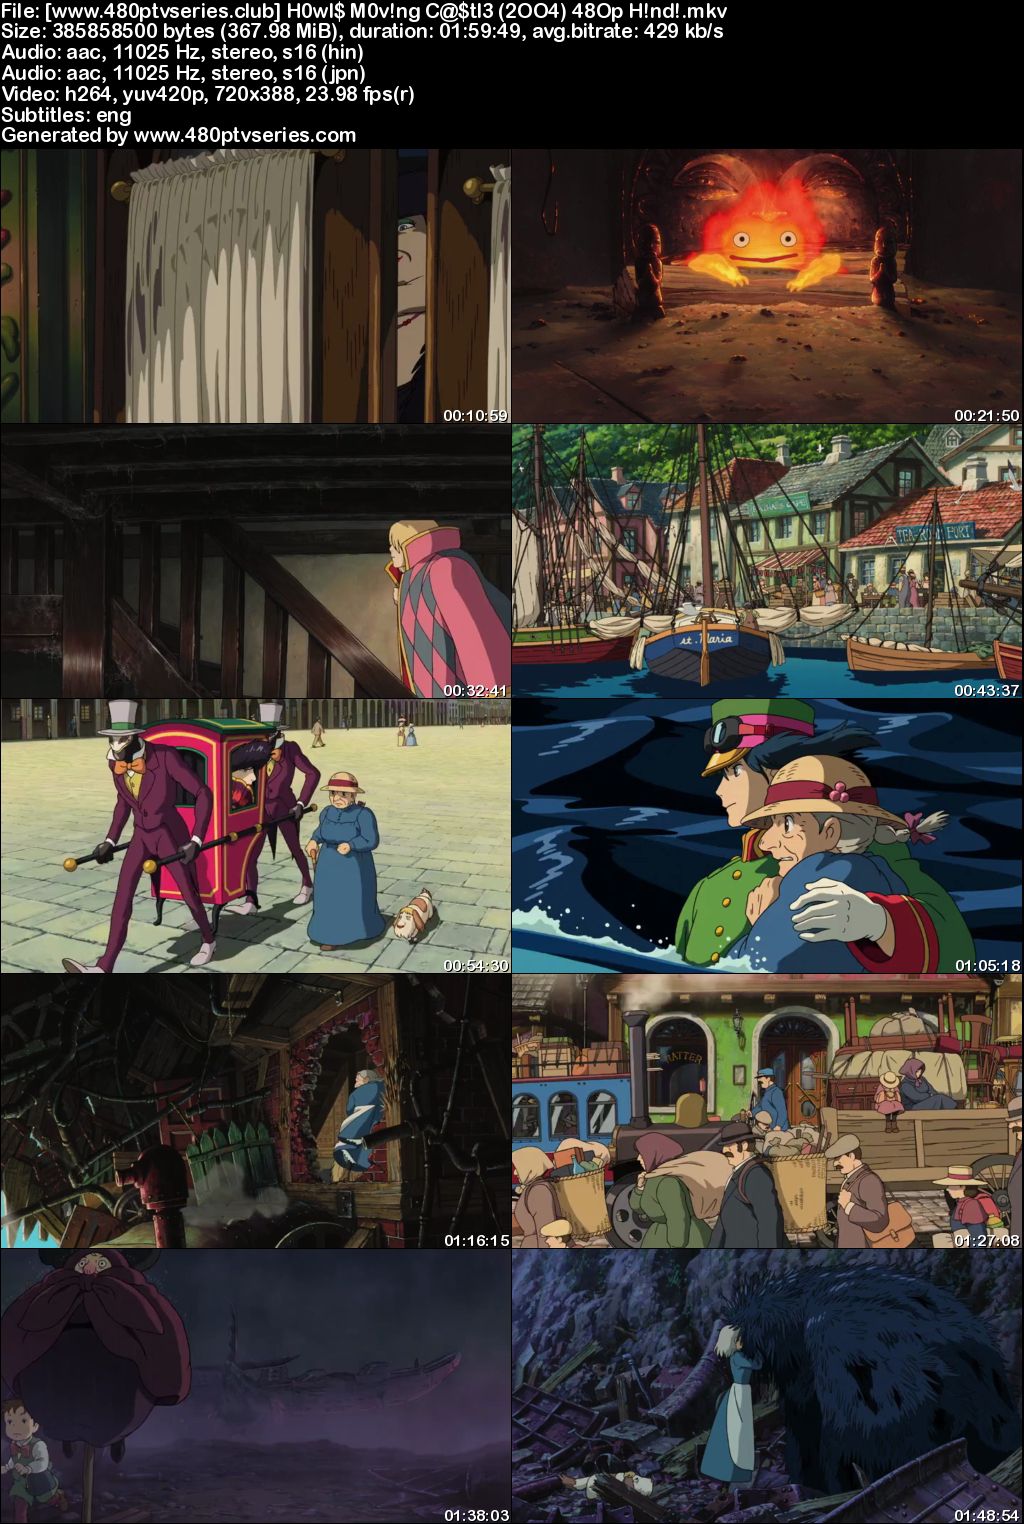 Howl's Moving Castle (2004) 350MB Full Hindi Dual Audio Movie Download 480p Bluray Free Watch Online Full Movie Download Worldfree4u 9xmovies